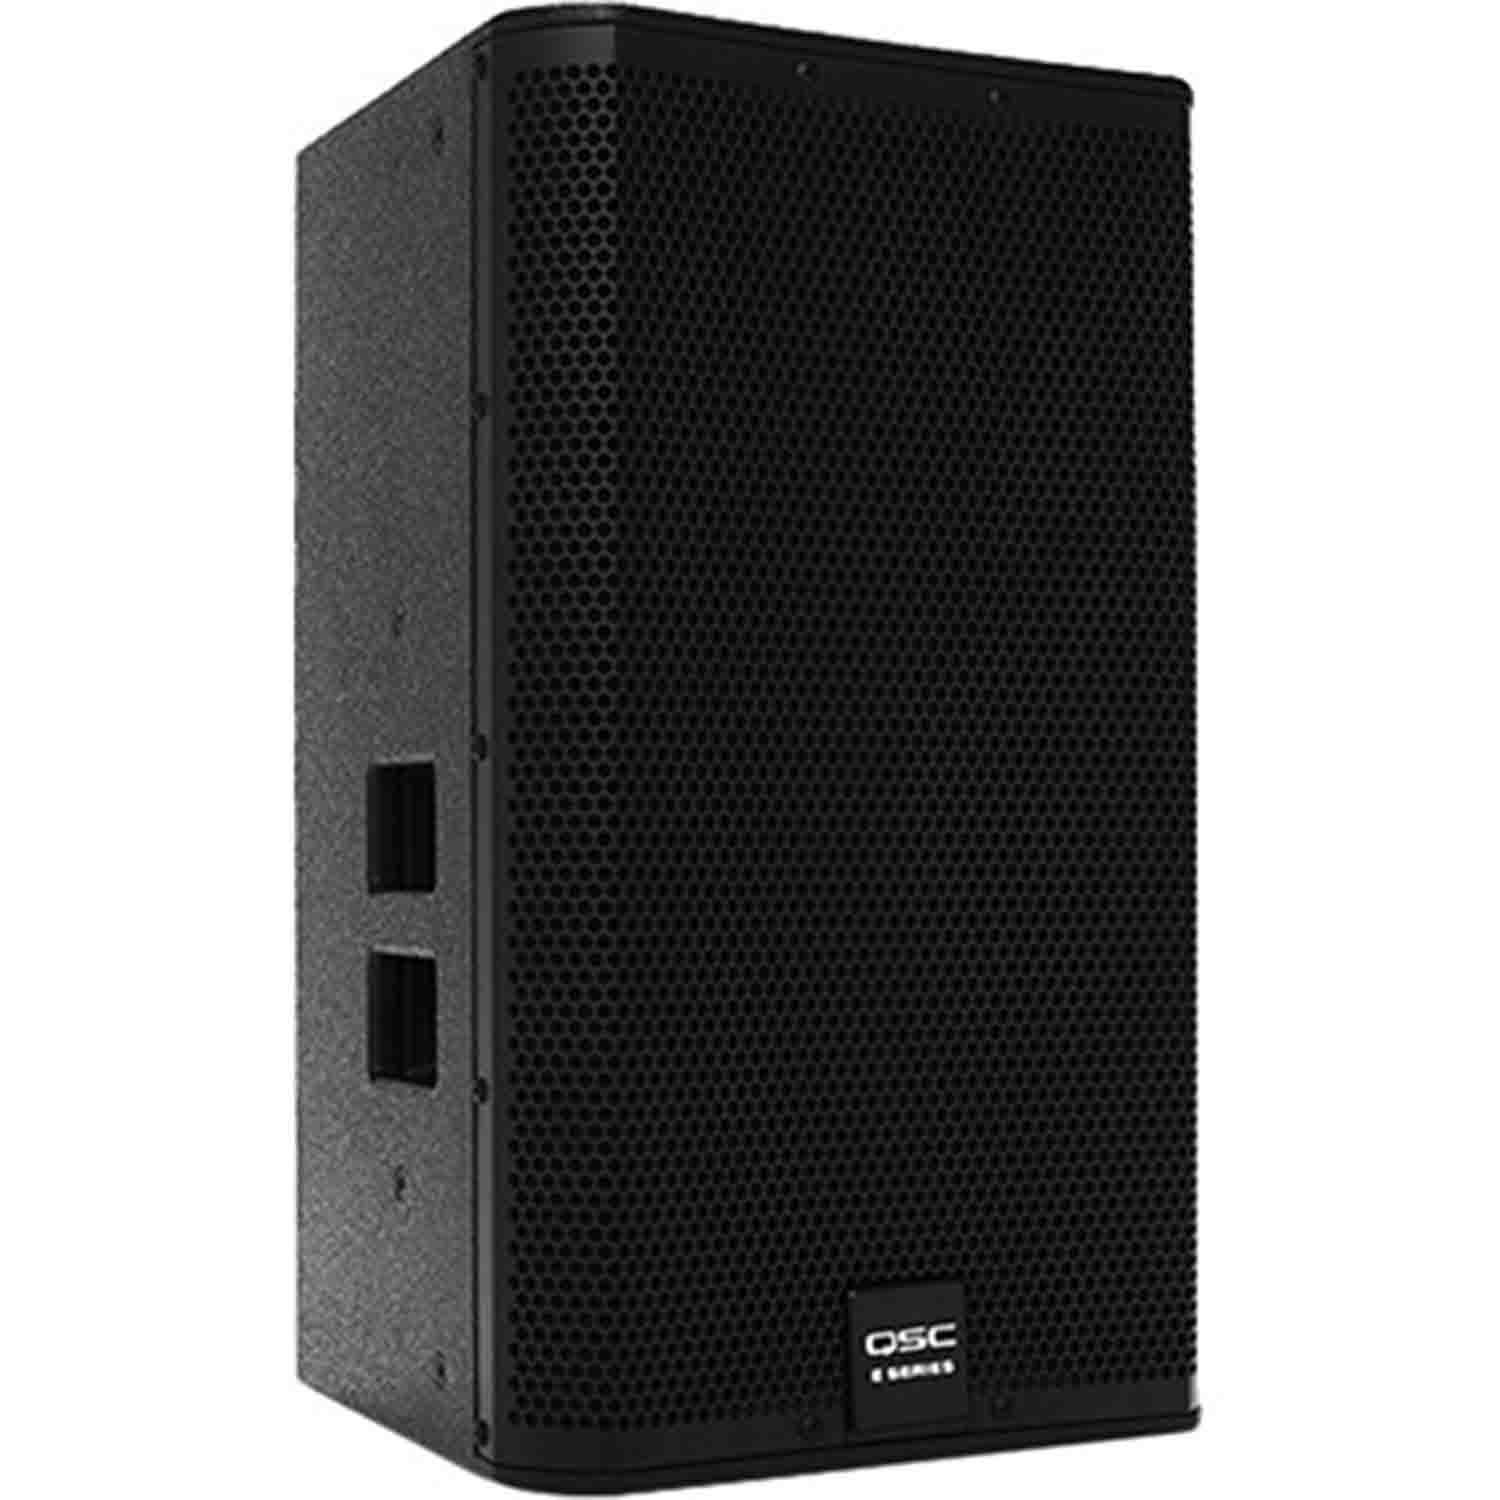 QSC E112, 12 Inches 2-Way Externally Powered, Live Sound Reinforcement Loud Speaker - Black - Hollywood DJ